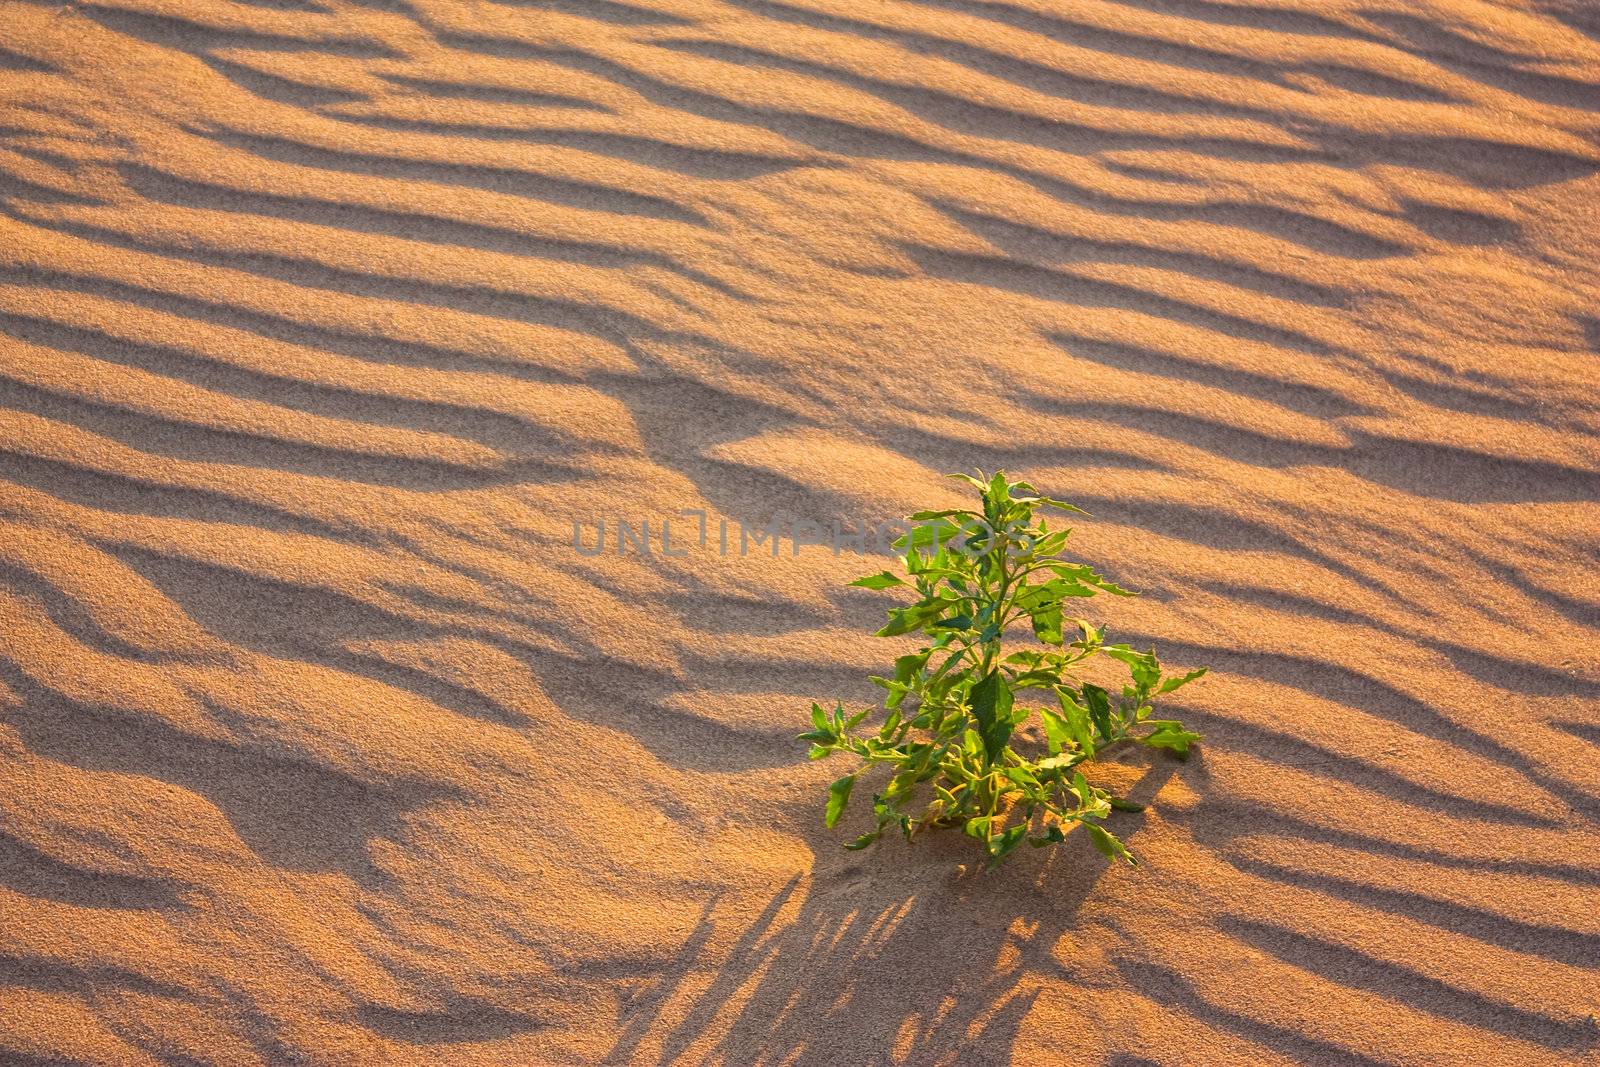 Lonely Flower in the sand in the desert at sunset